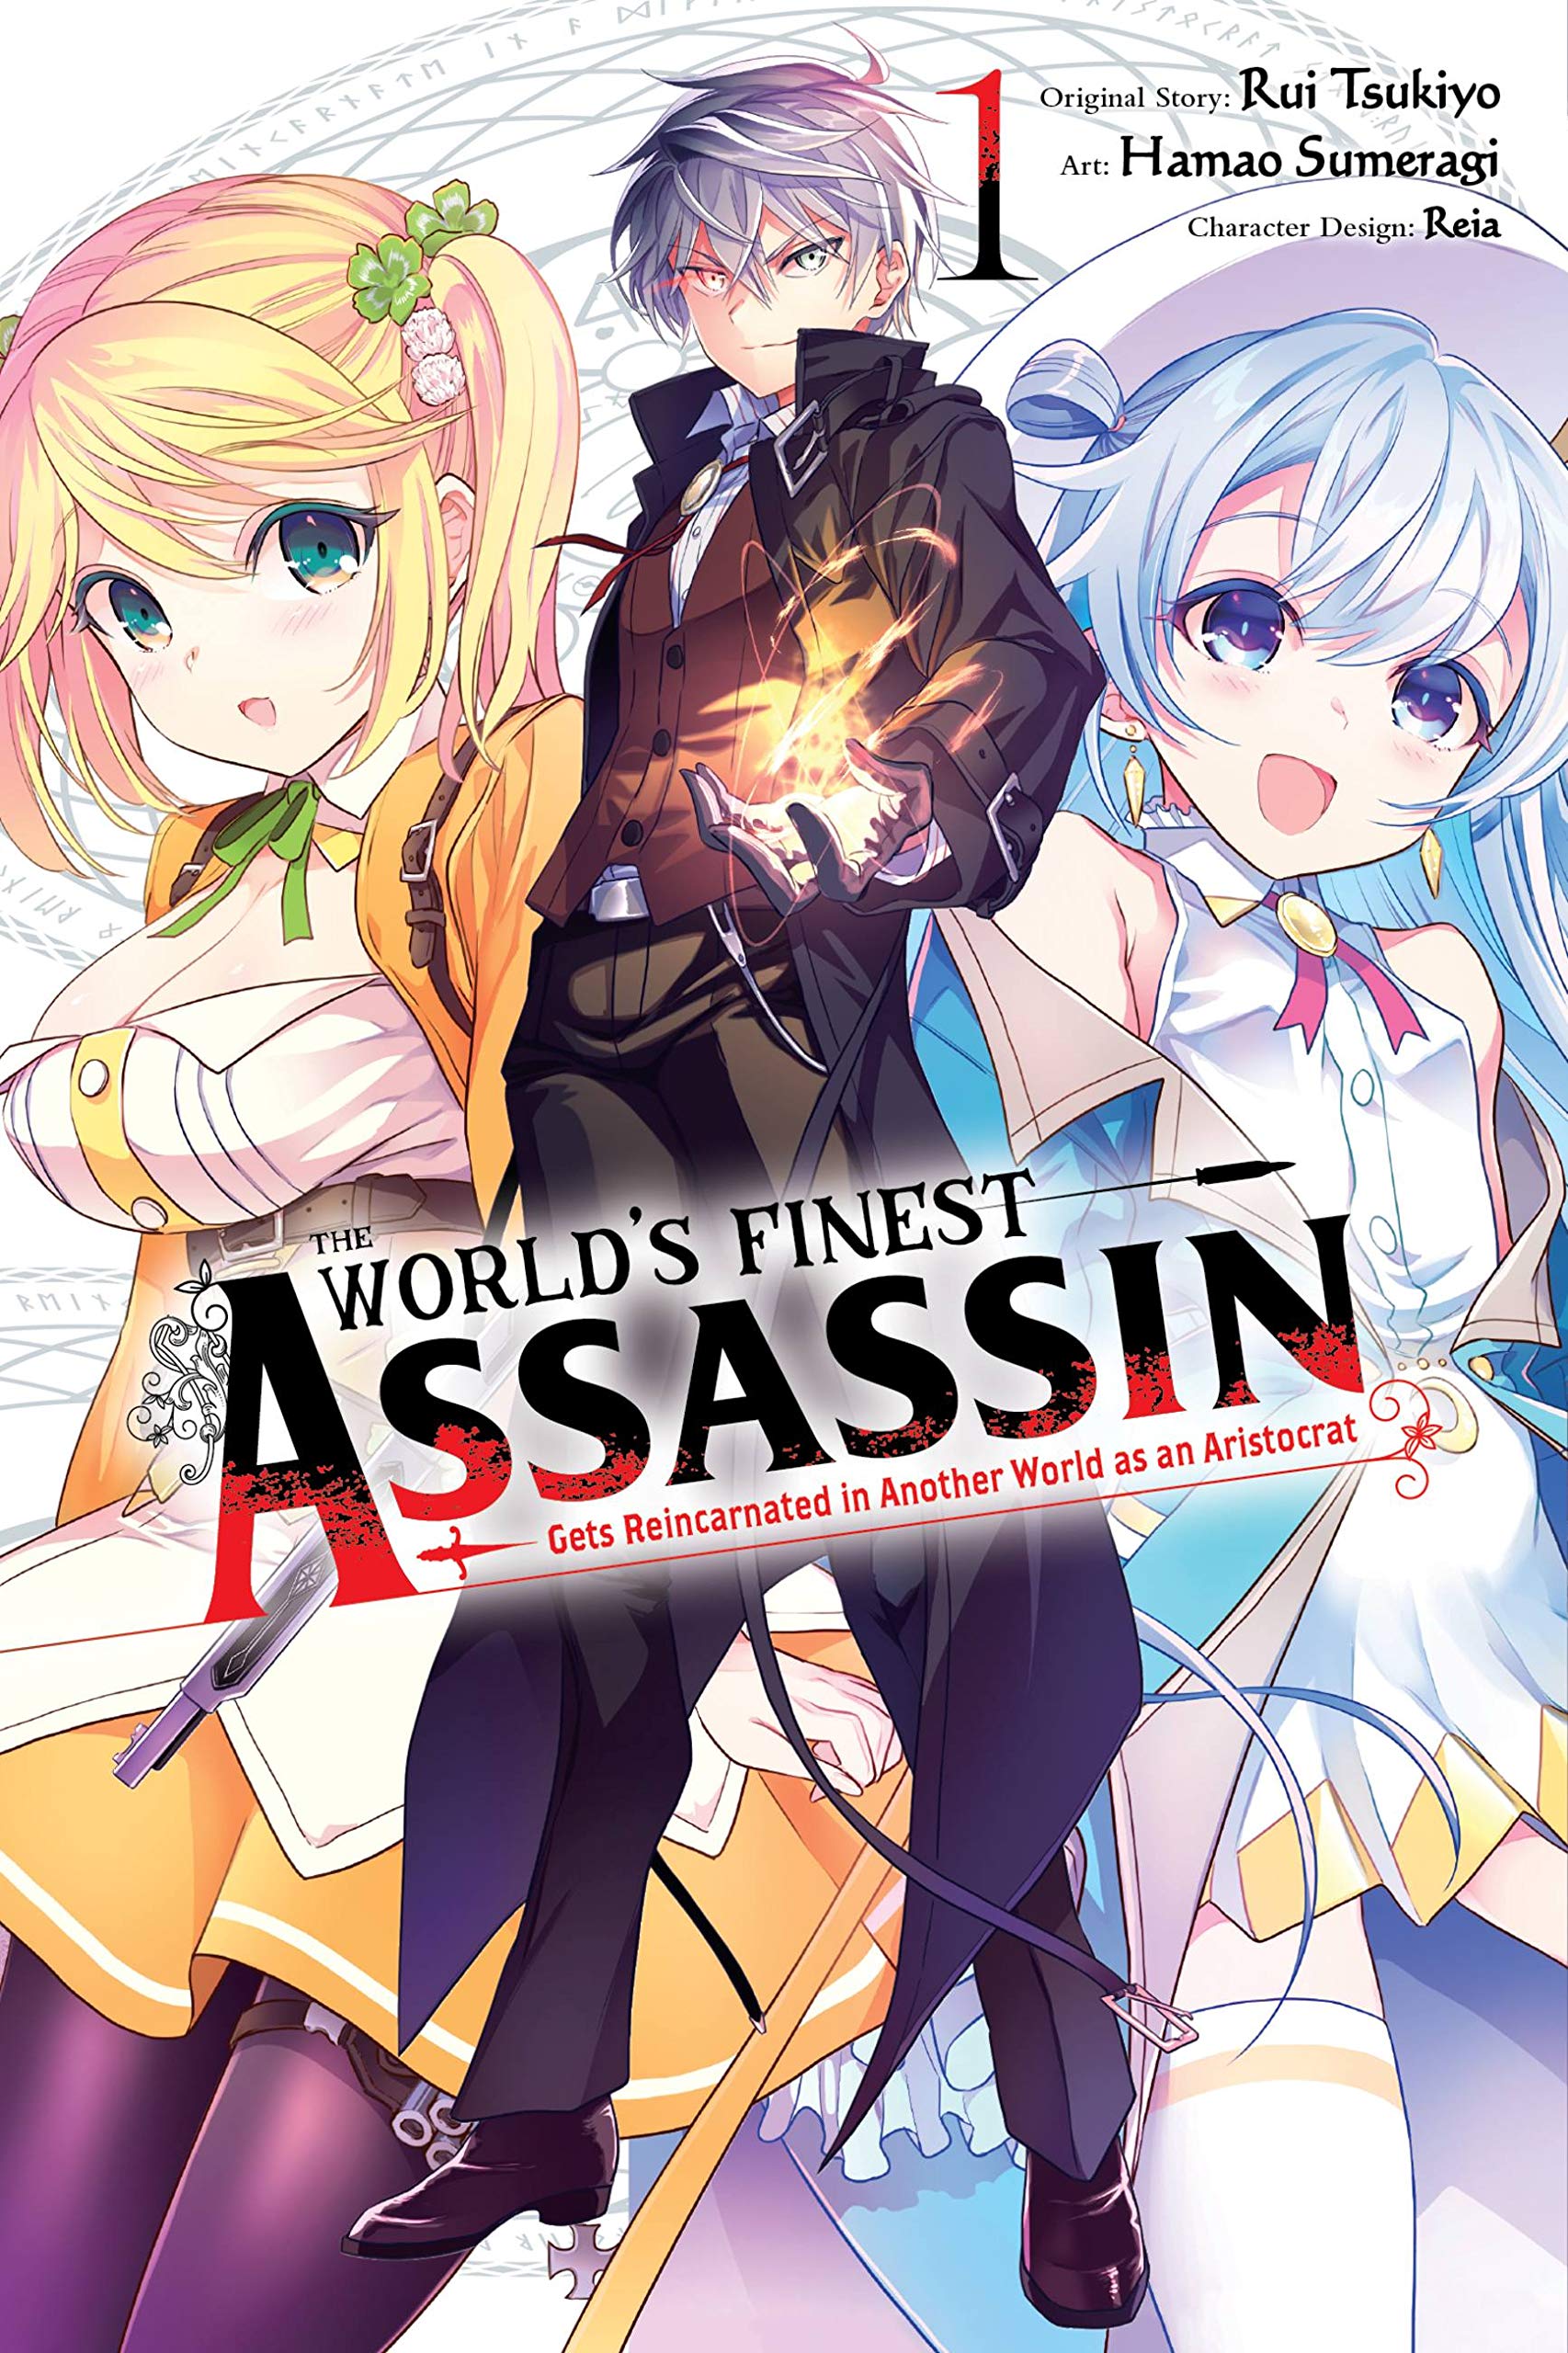 The World's Finest Assassin Gets Reincarnated in Another World as an Aristocrat, Vol. 1 (manga) (The World's Finest Assassin Gets Reincarnated in Another World as an Aristocrat (manga), 1): Tsukiyo, Rui, Reia